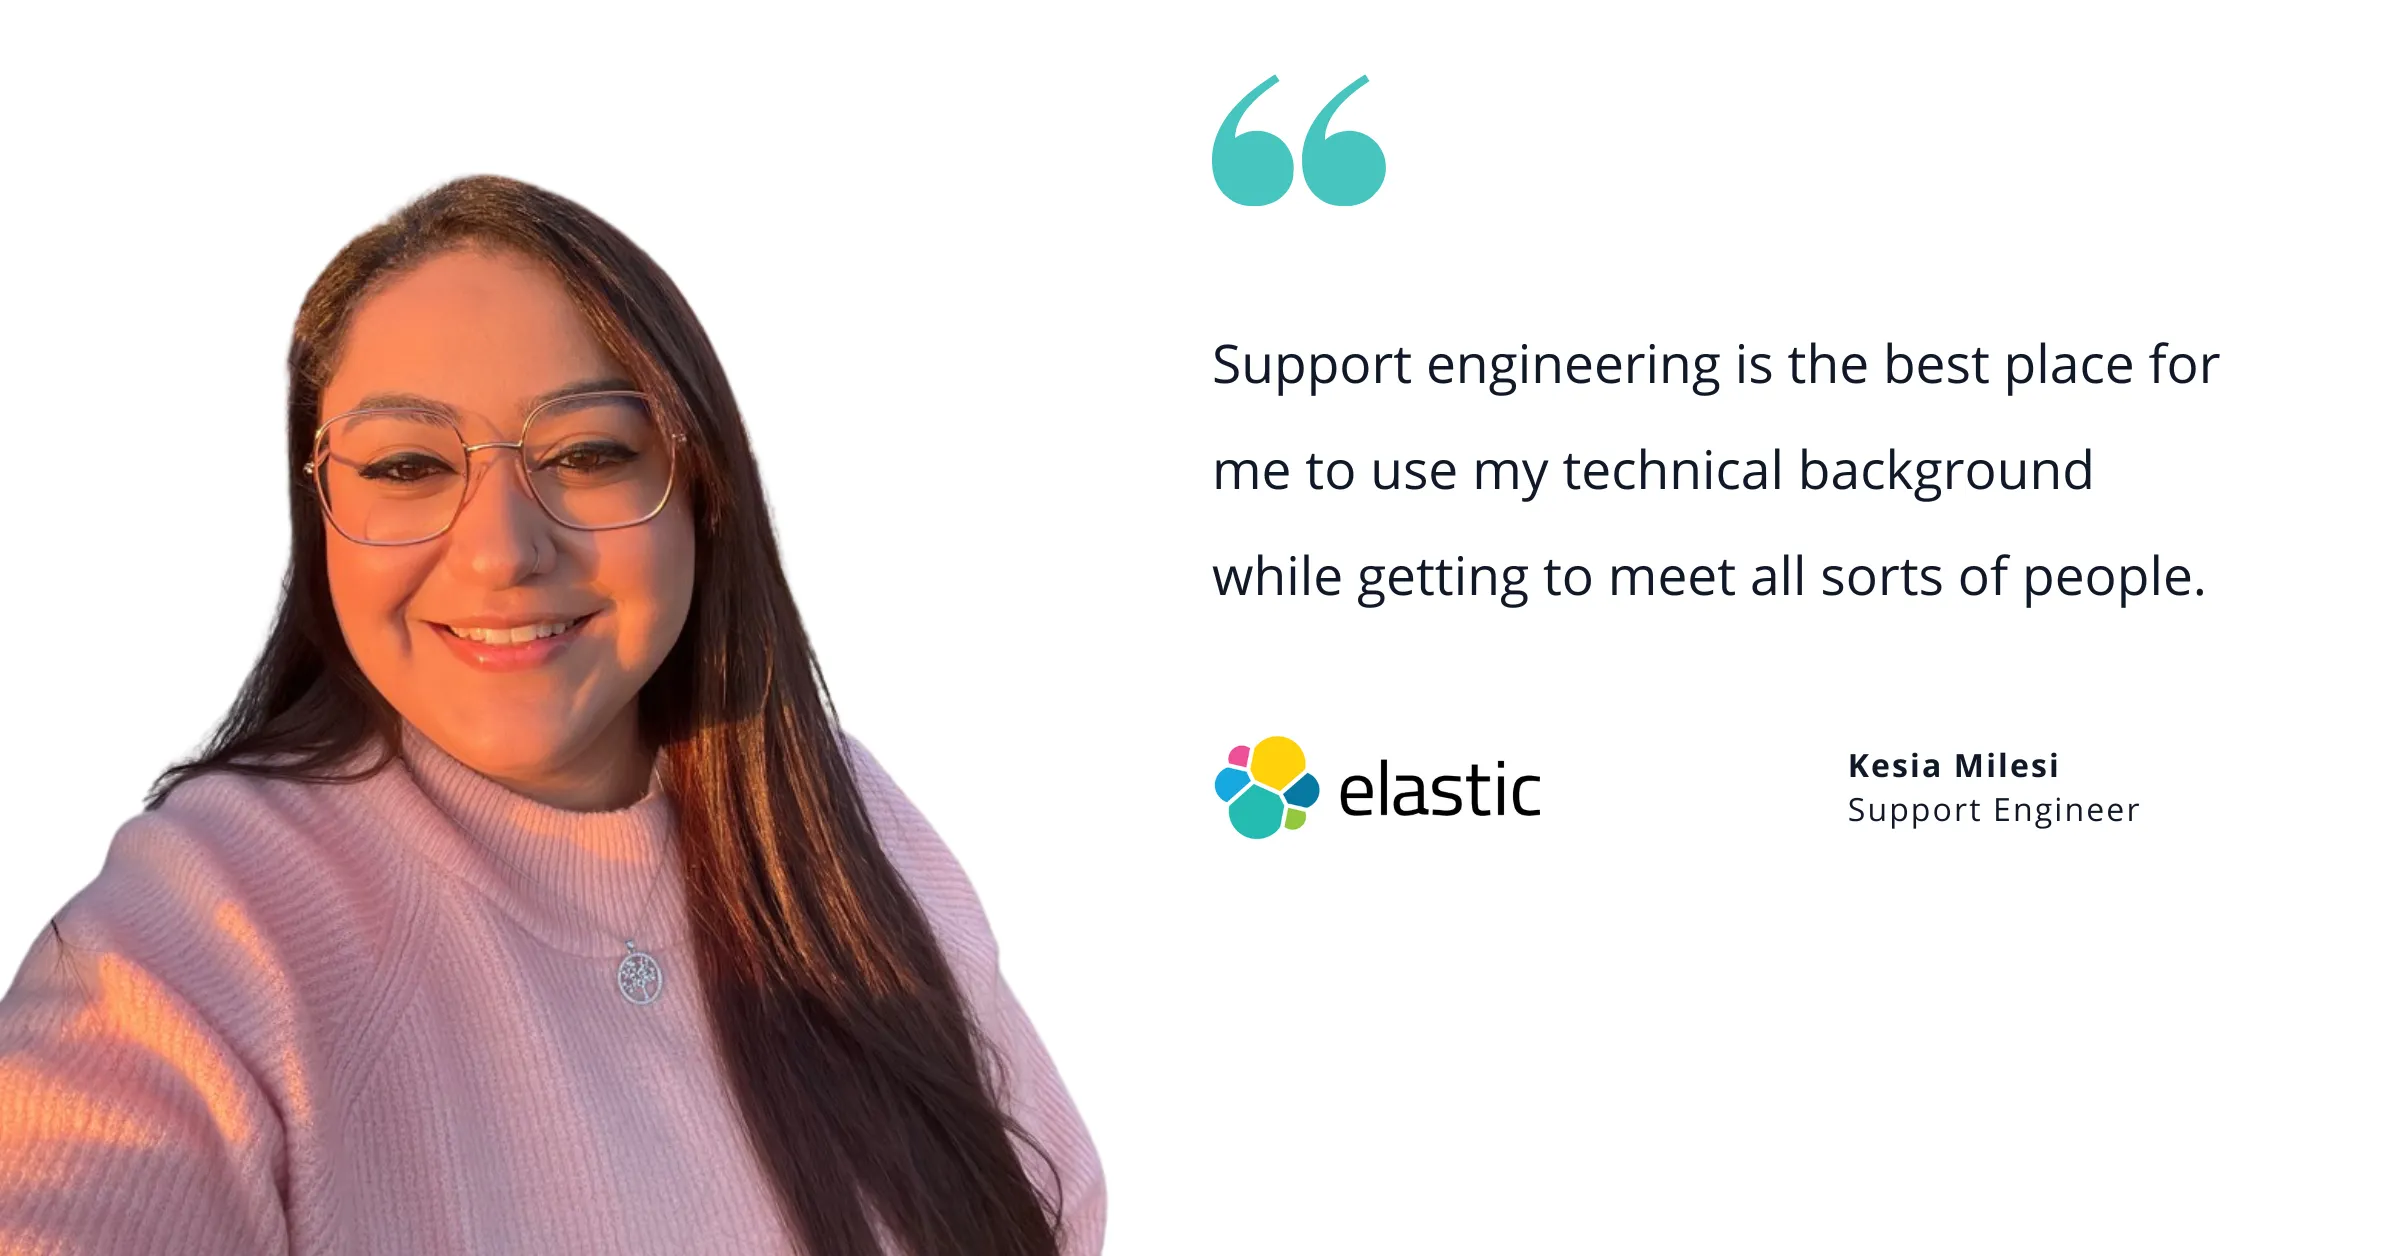 photo-of-elastic-s-kesia-milesi-support-engineer-with-quote-saying-support-engineering-is-the-best-place-for-me-to-use-my-te.webp